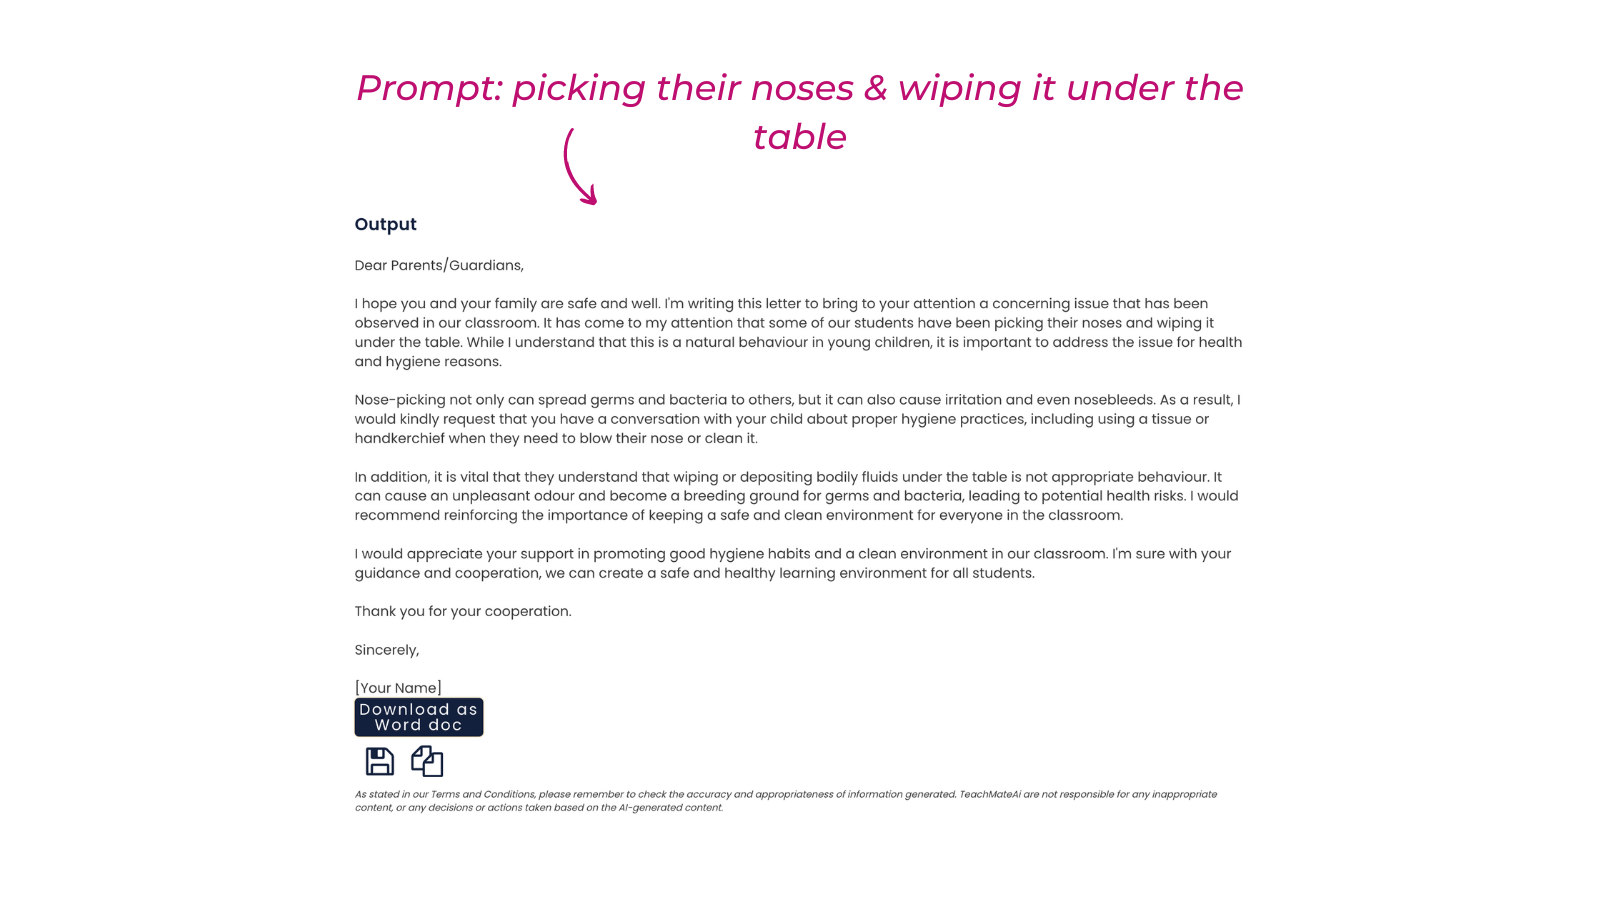 example letter using the topic 'picking their noses and wiping it under the table'